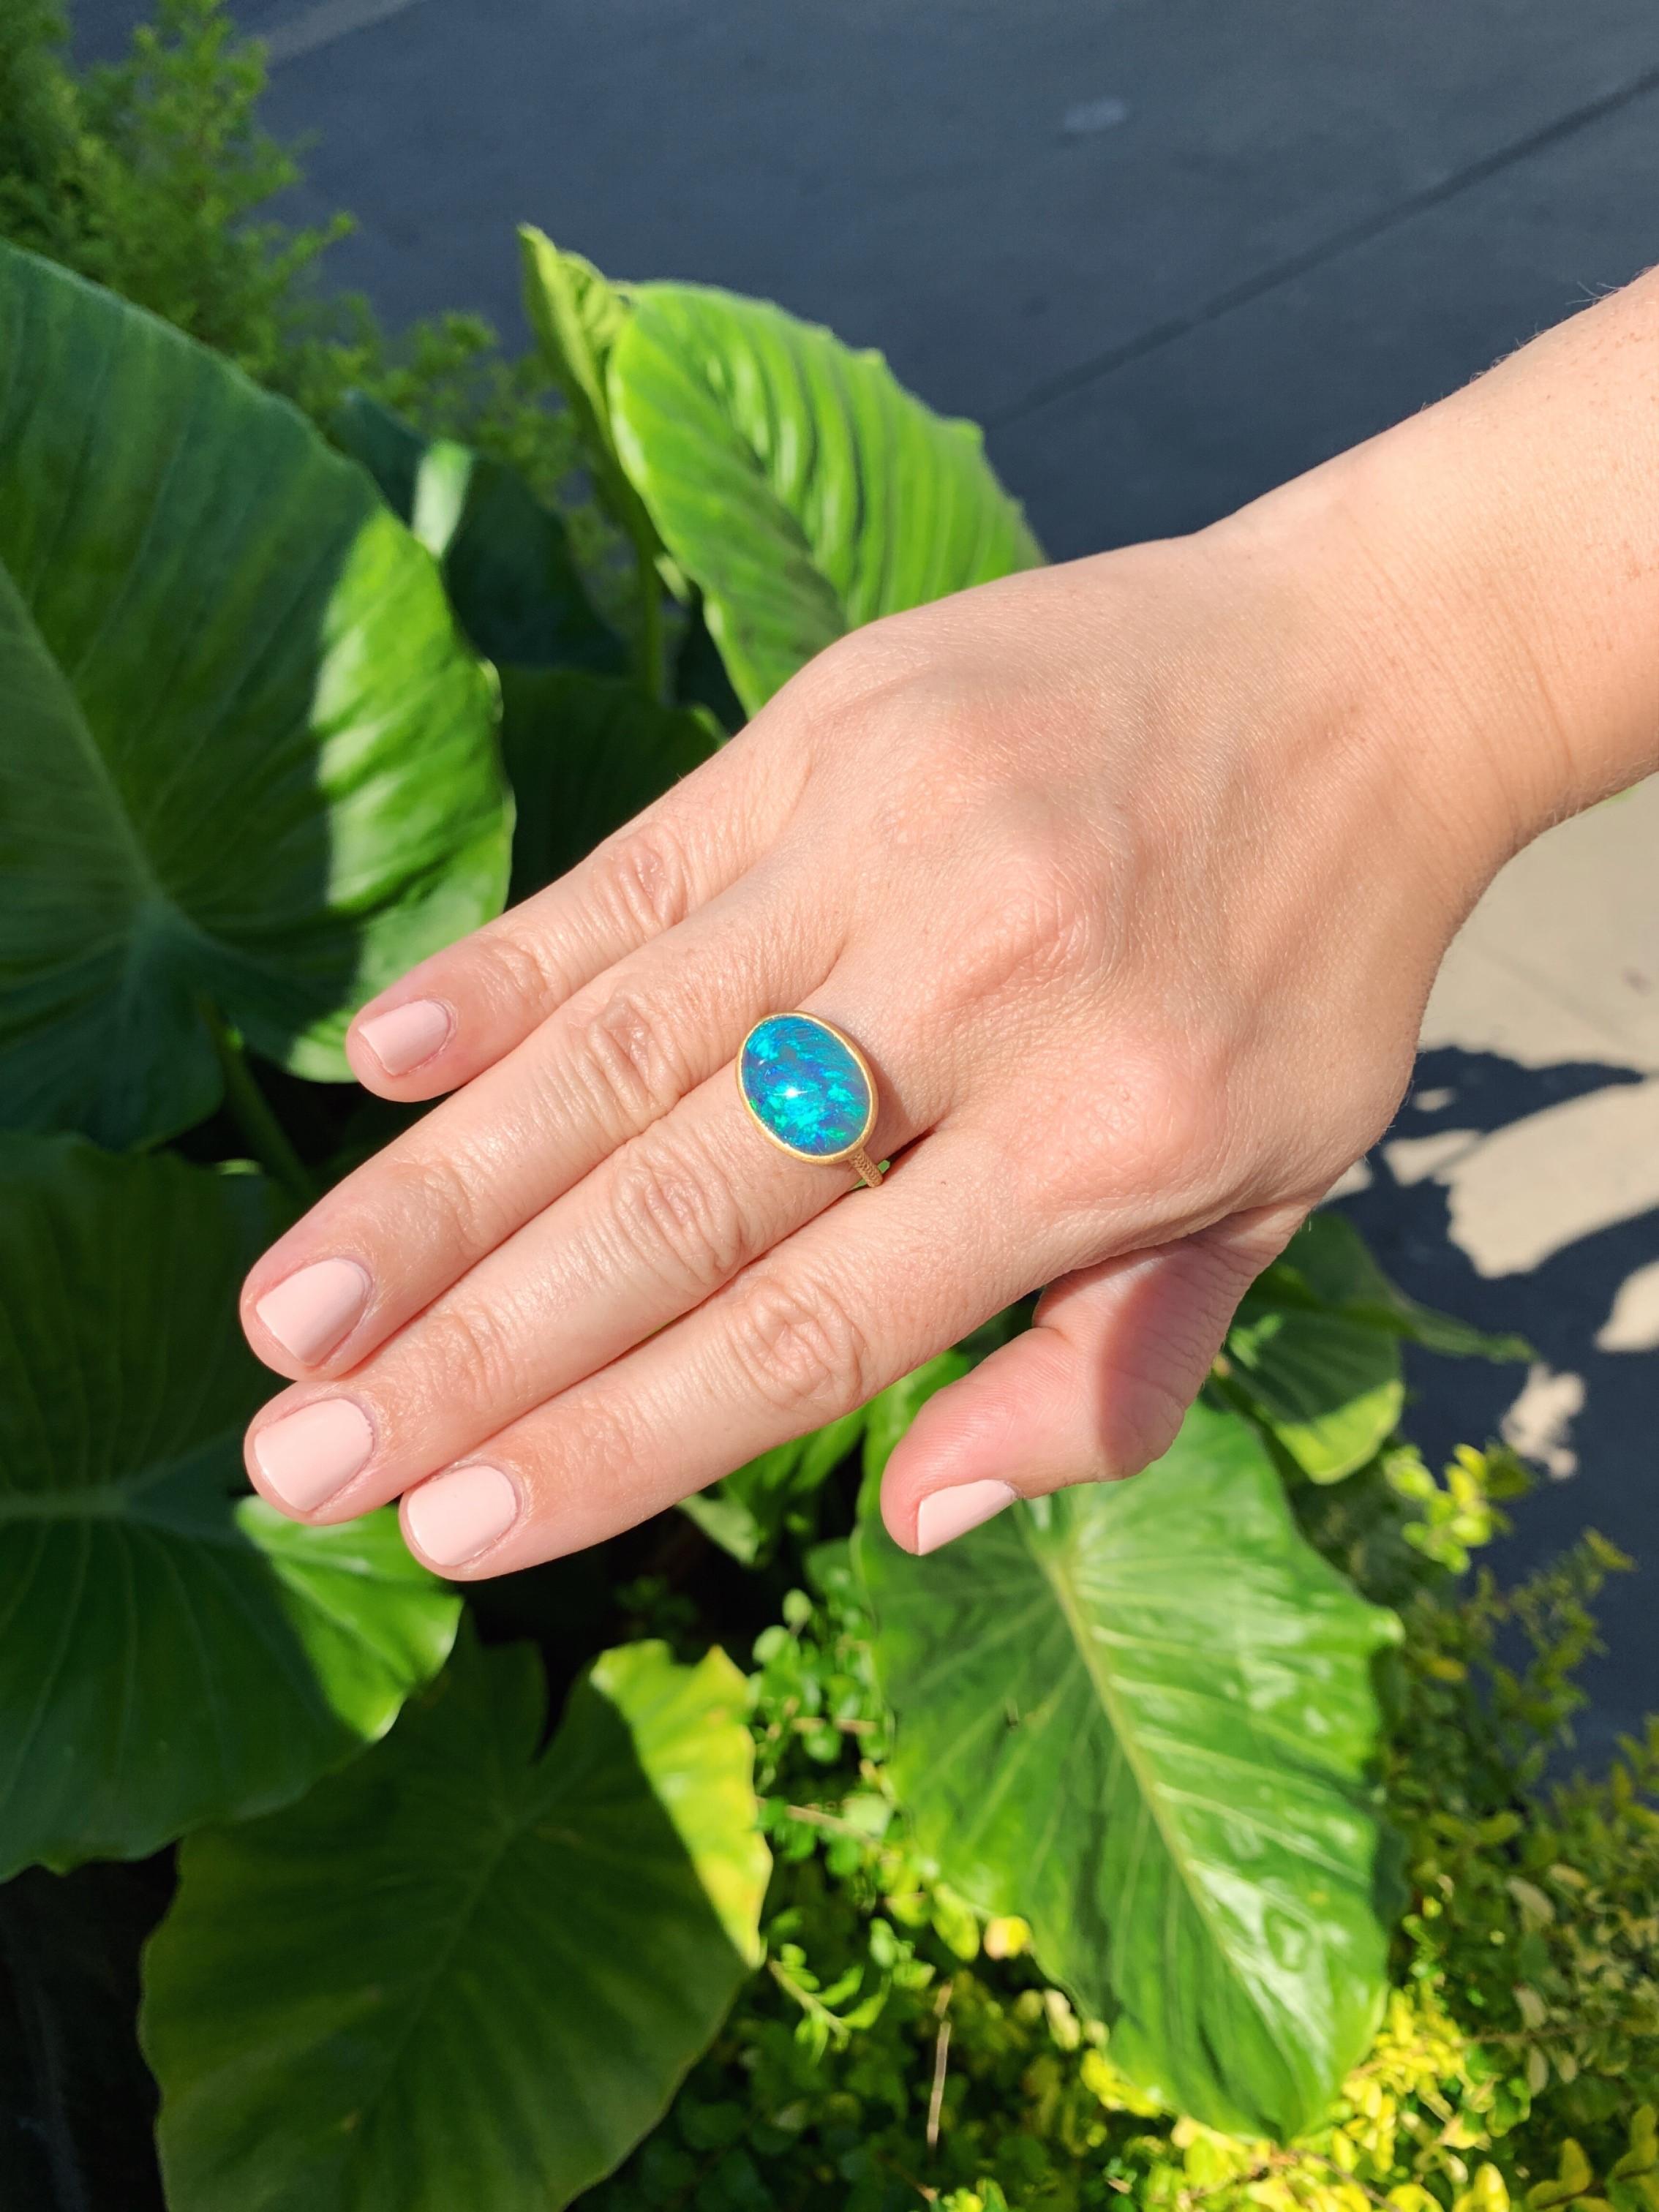 One of a Kind Editions Ring hand-fabricated in Japan by jewelry designer Shinobu Marotta (Talkative Atelier) showcasing a phenomenal, electrifying 7.54 carat black opal from the renowned Lightning Ridge mine in Australia, framed and bezel-set in